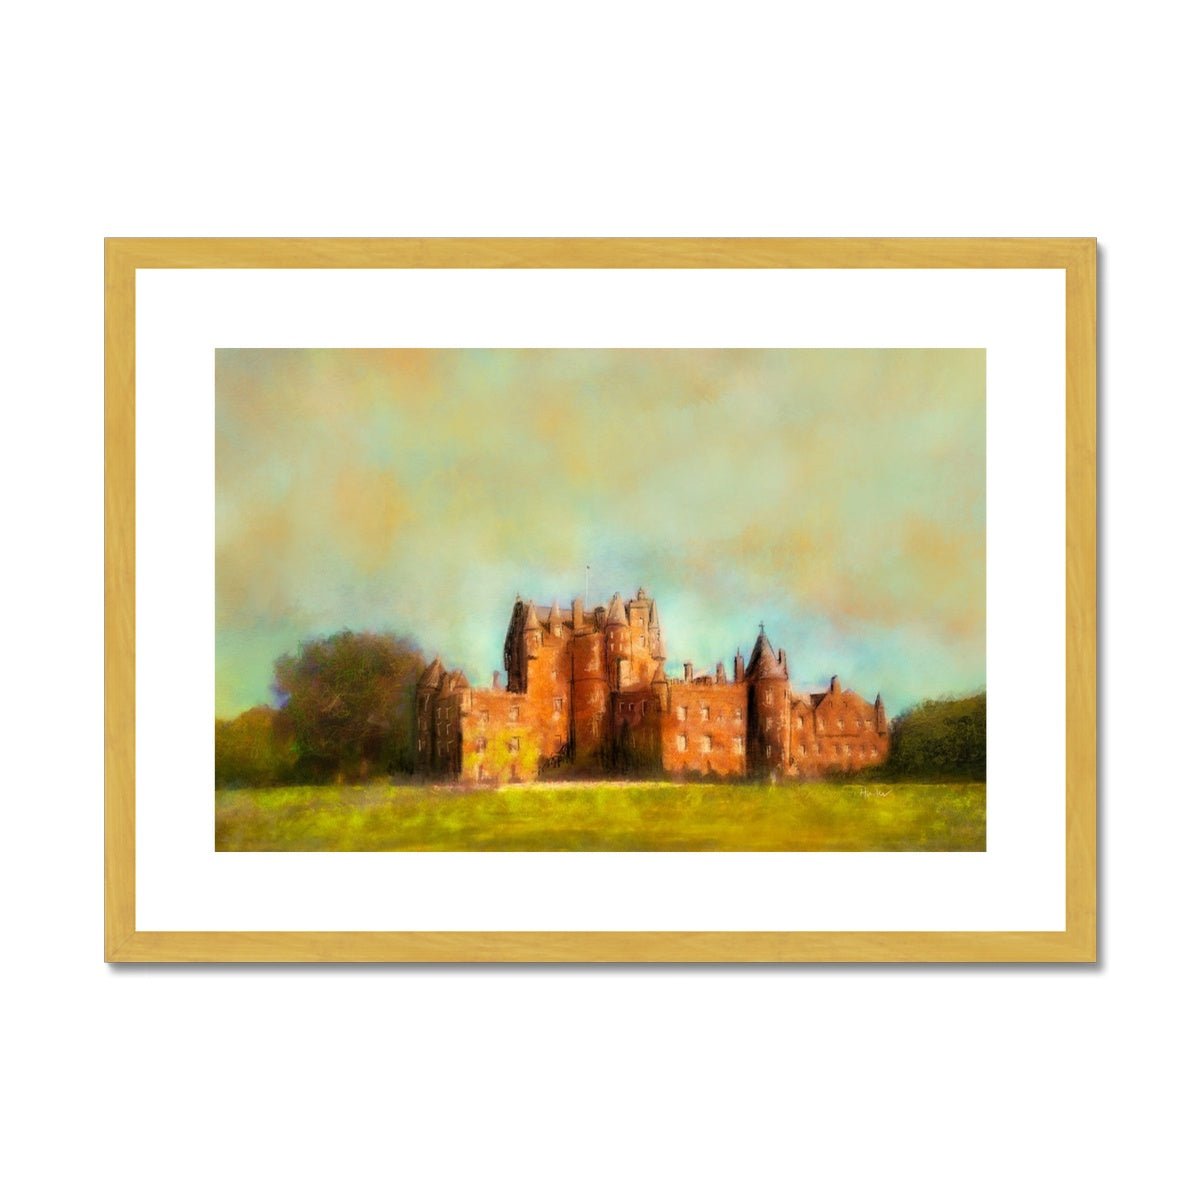 Glamis Castle Painting | Antique Framed & Mounted Prints From Scotland-Antique Framed & Mounted Prints-Scottish Castles Art Gallery-A2 Landscape-Gold Frame-Paintings, Prints, Homeware, Art Gifts From Scotland By Scottish Artist Kevin Hunter